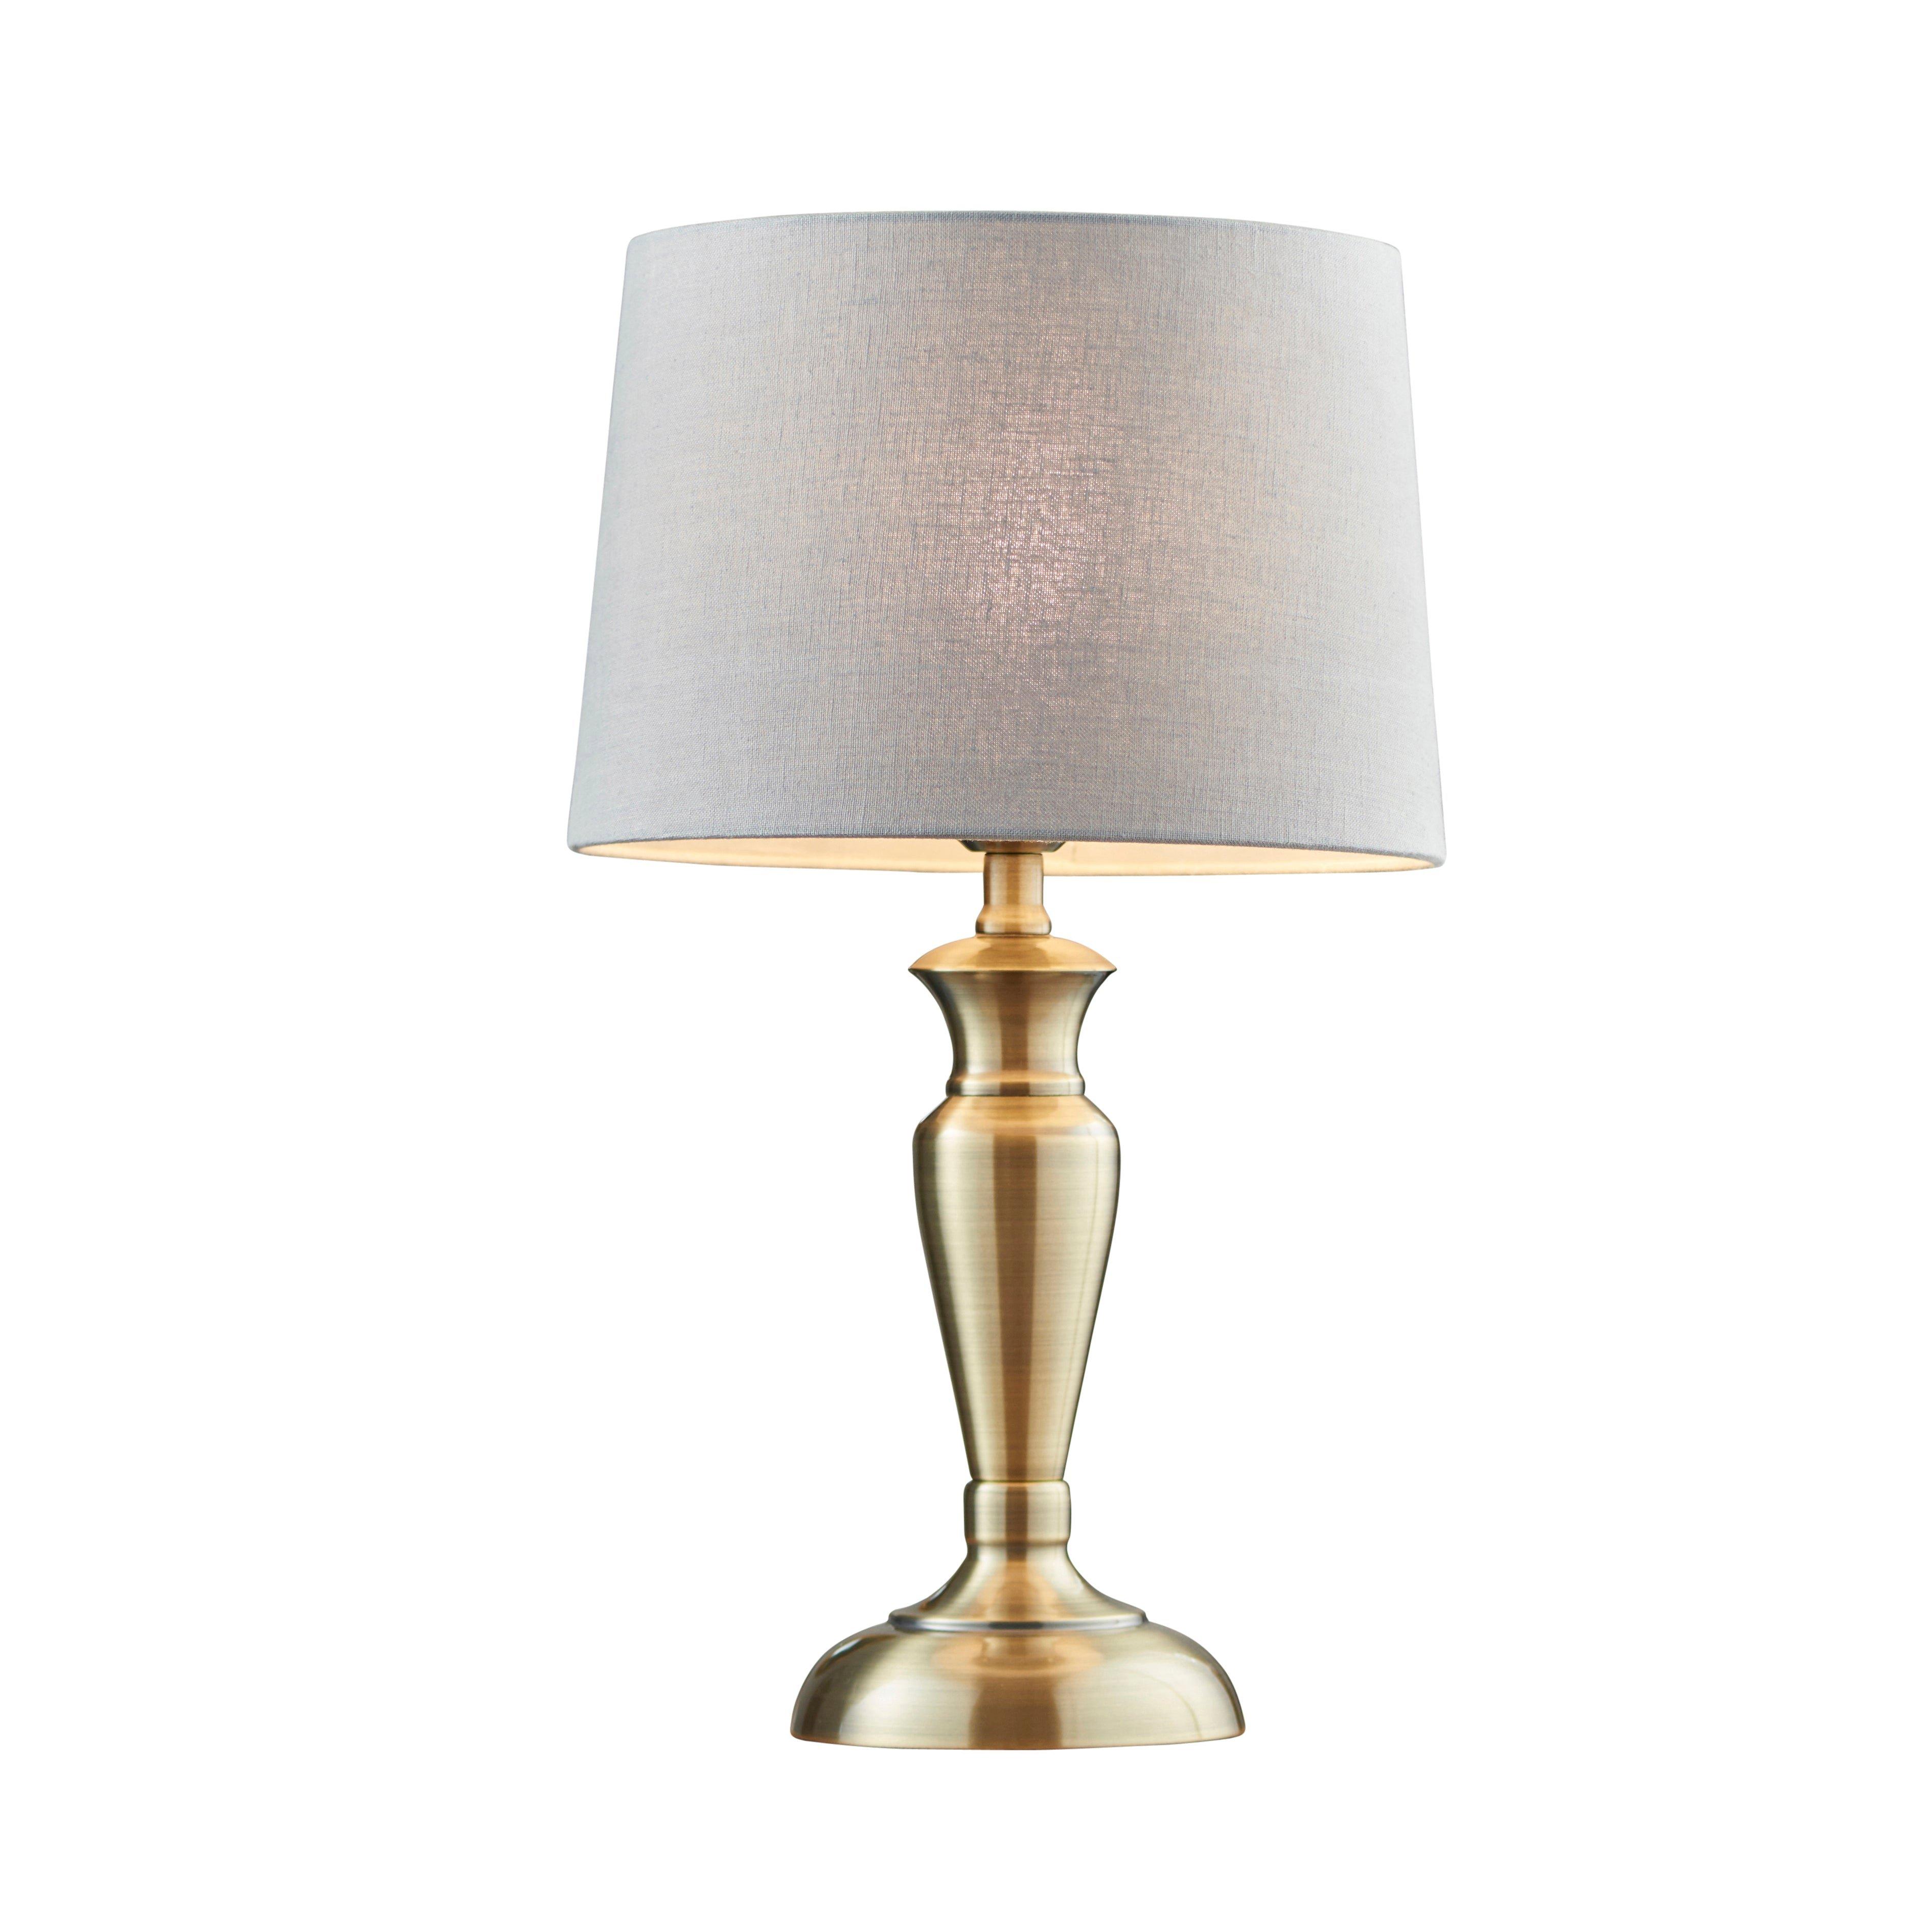 Table Lamp Antique Brass Plate & Charcoal Linen 60W E27 GLS Base & Shade